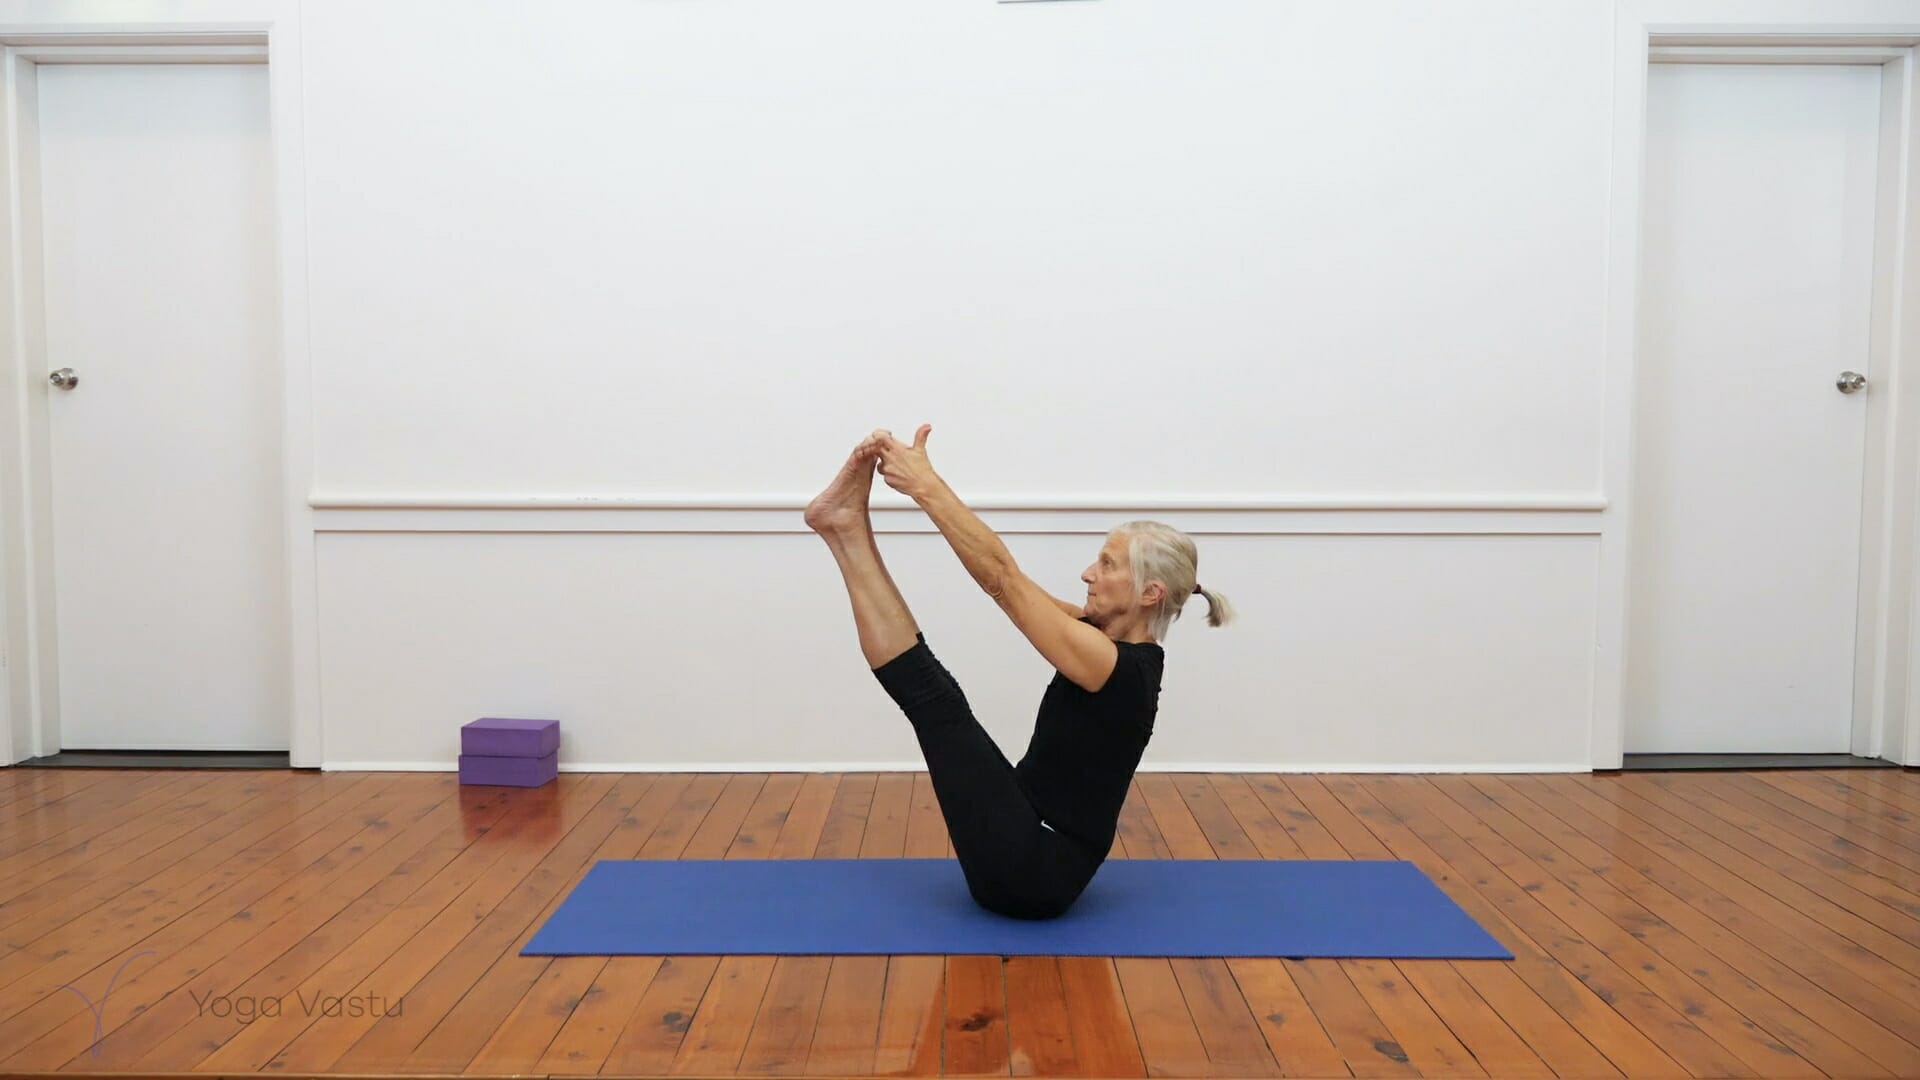 Iyengar yoga sequence to energise the body and mind